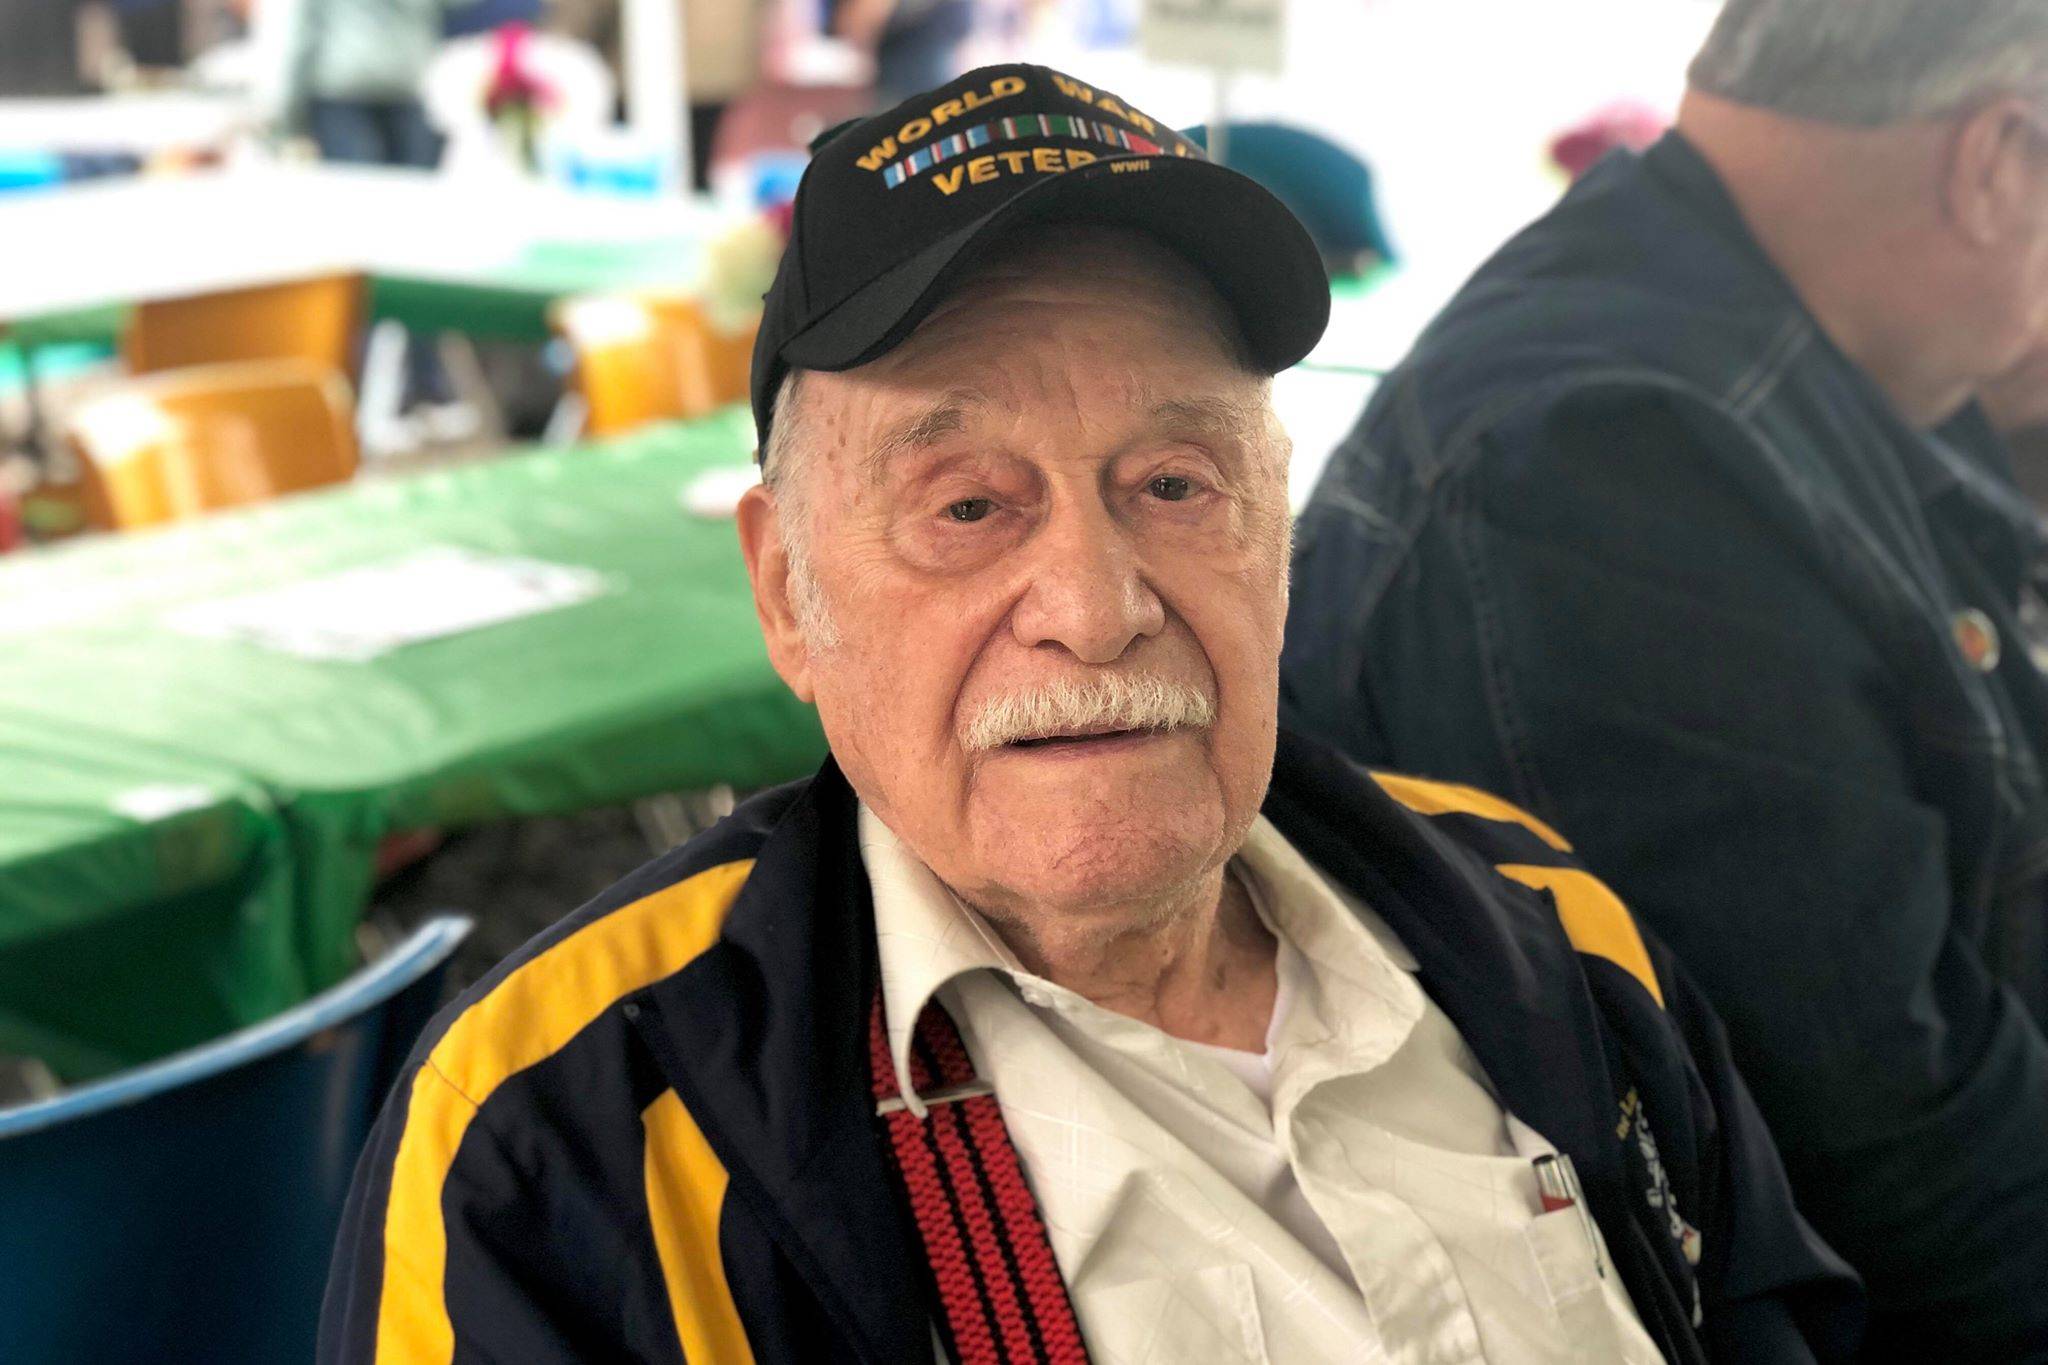 Al Hershberger was honored at the Soldotna Progress Days Pioneer Barbecue and Meet and Greet, where was named grand marshal of the Progress Days Parade, Friday, July 26, 2019, in Soldotna, Alaska. (Photo by Victoria Petersen/Peninsula Clarion)